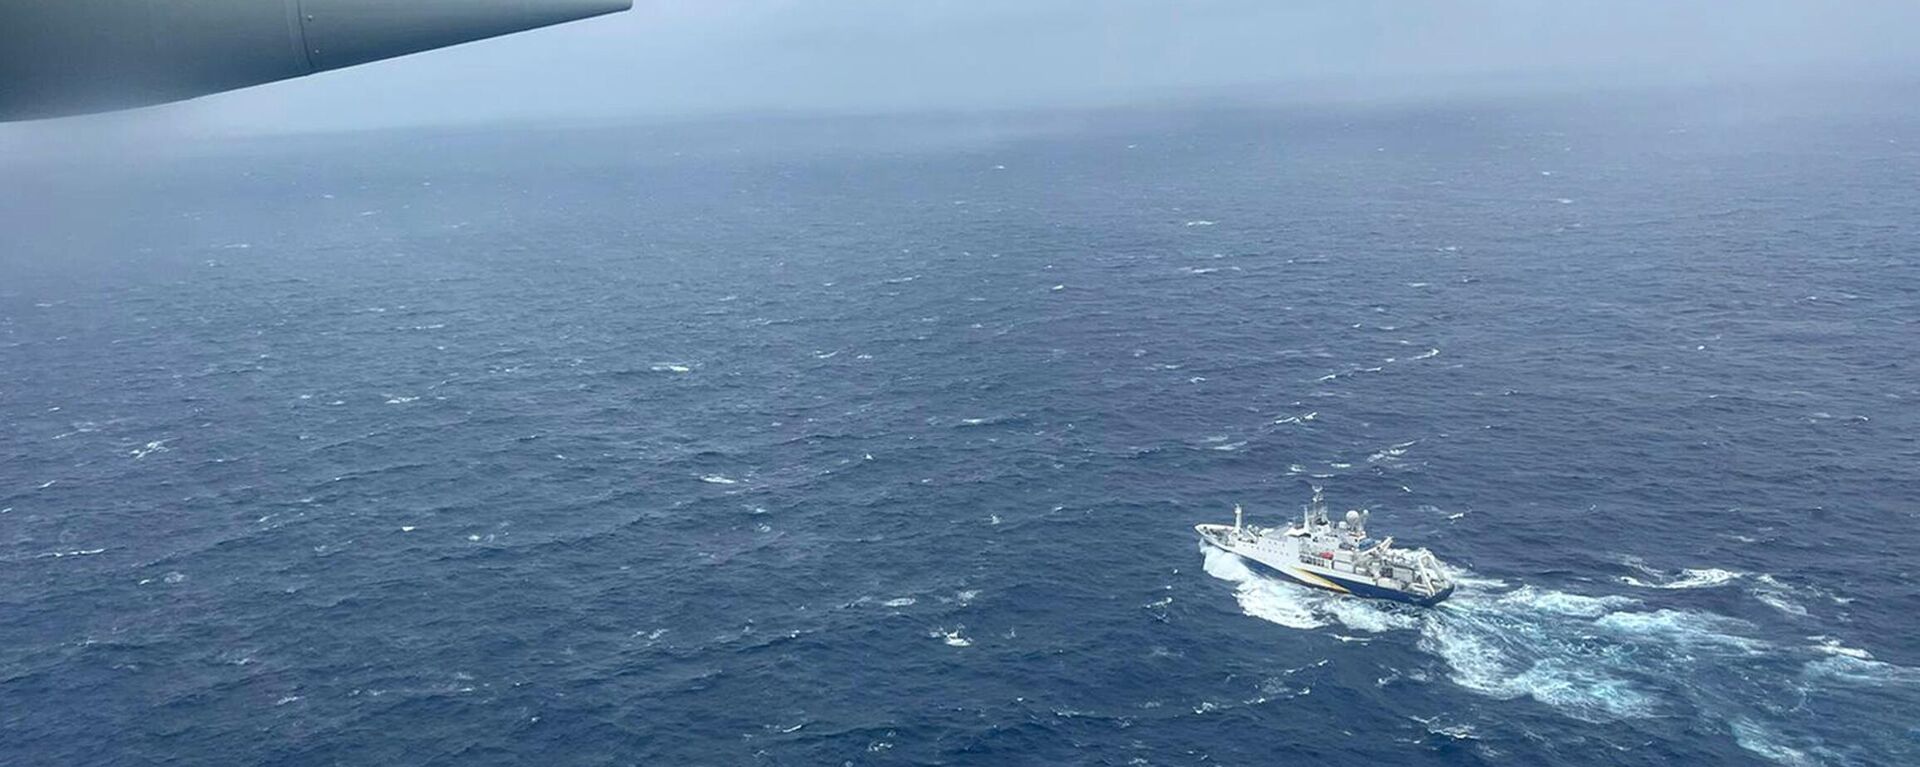 In this image provided by the U.S. Coast Guard, a Coast Guard HC-130 Hercules airplane based at Coast Guard Air Station Elizabeth City, N.C., flies over the French research vessel, L'Atalante approximately 900 miles East of Cape Cod, Mass., during the search for the 21-foot submersible, Titan, Wednesday, June 21, 2023. - Sputnik International, 1920, 25.06.2023